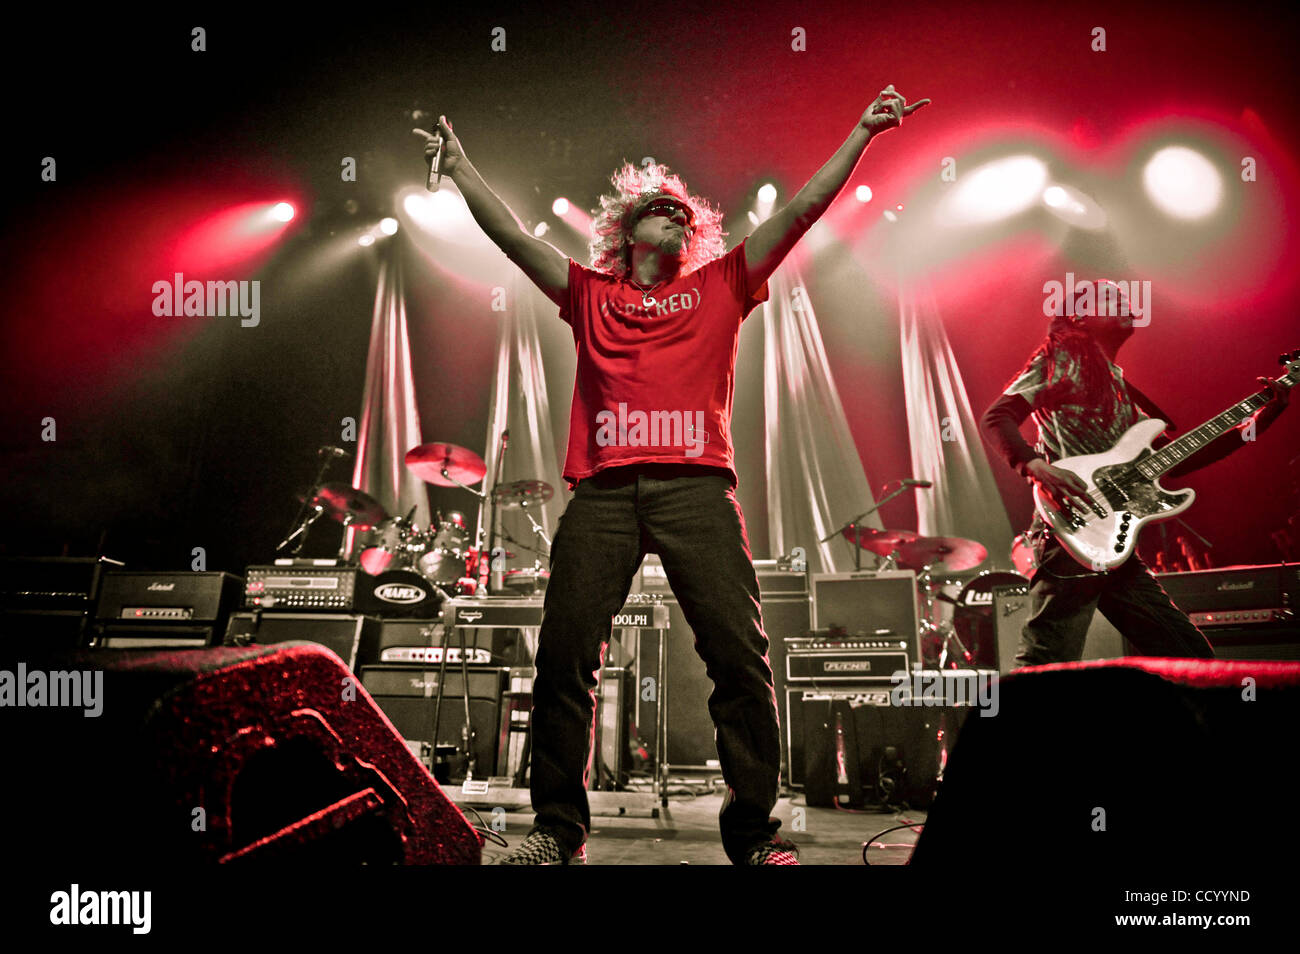 Mar 10, 2010 - San Francisco, California, USA - SAMMY HAGAR and DOUG WIMBISH performs live at the Warfield Theater during the Experience Hendrix Tribute Tour. (Credit Image: © Jerome Brunet/ZUMA Press) Stock Photo